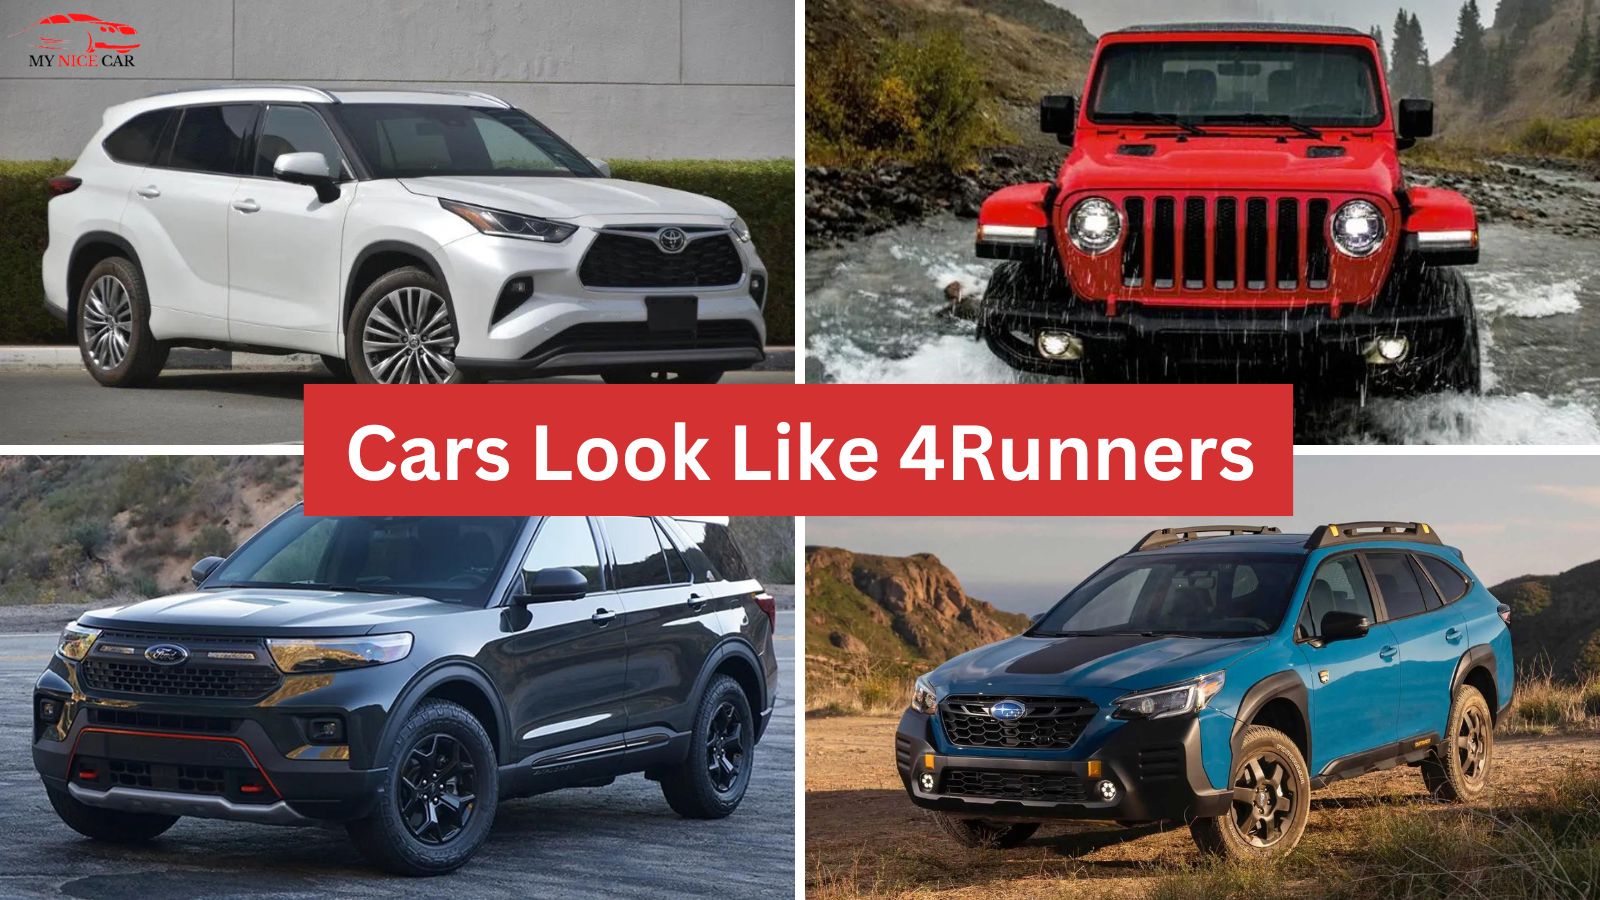 You are currently viewing 8 Cars Look Like 4Runners That Make You Do a Double Take